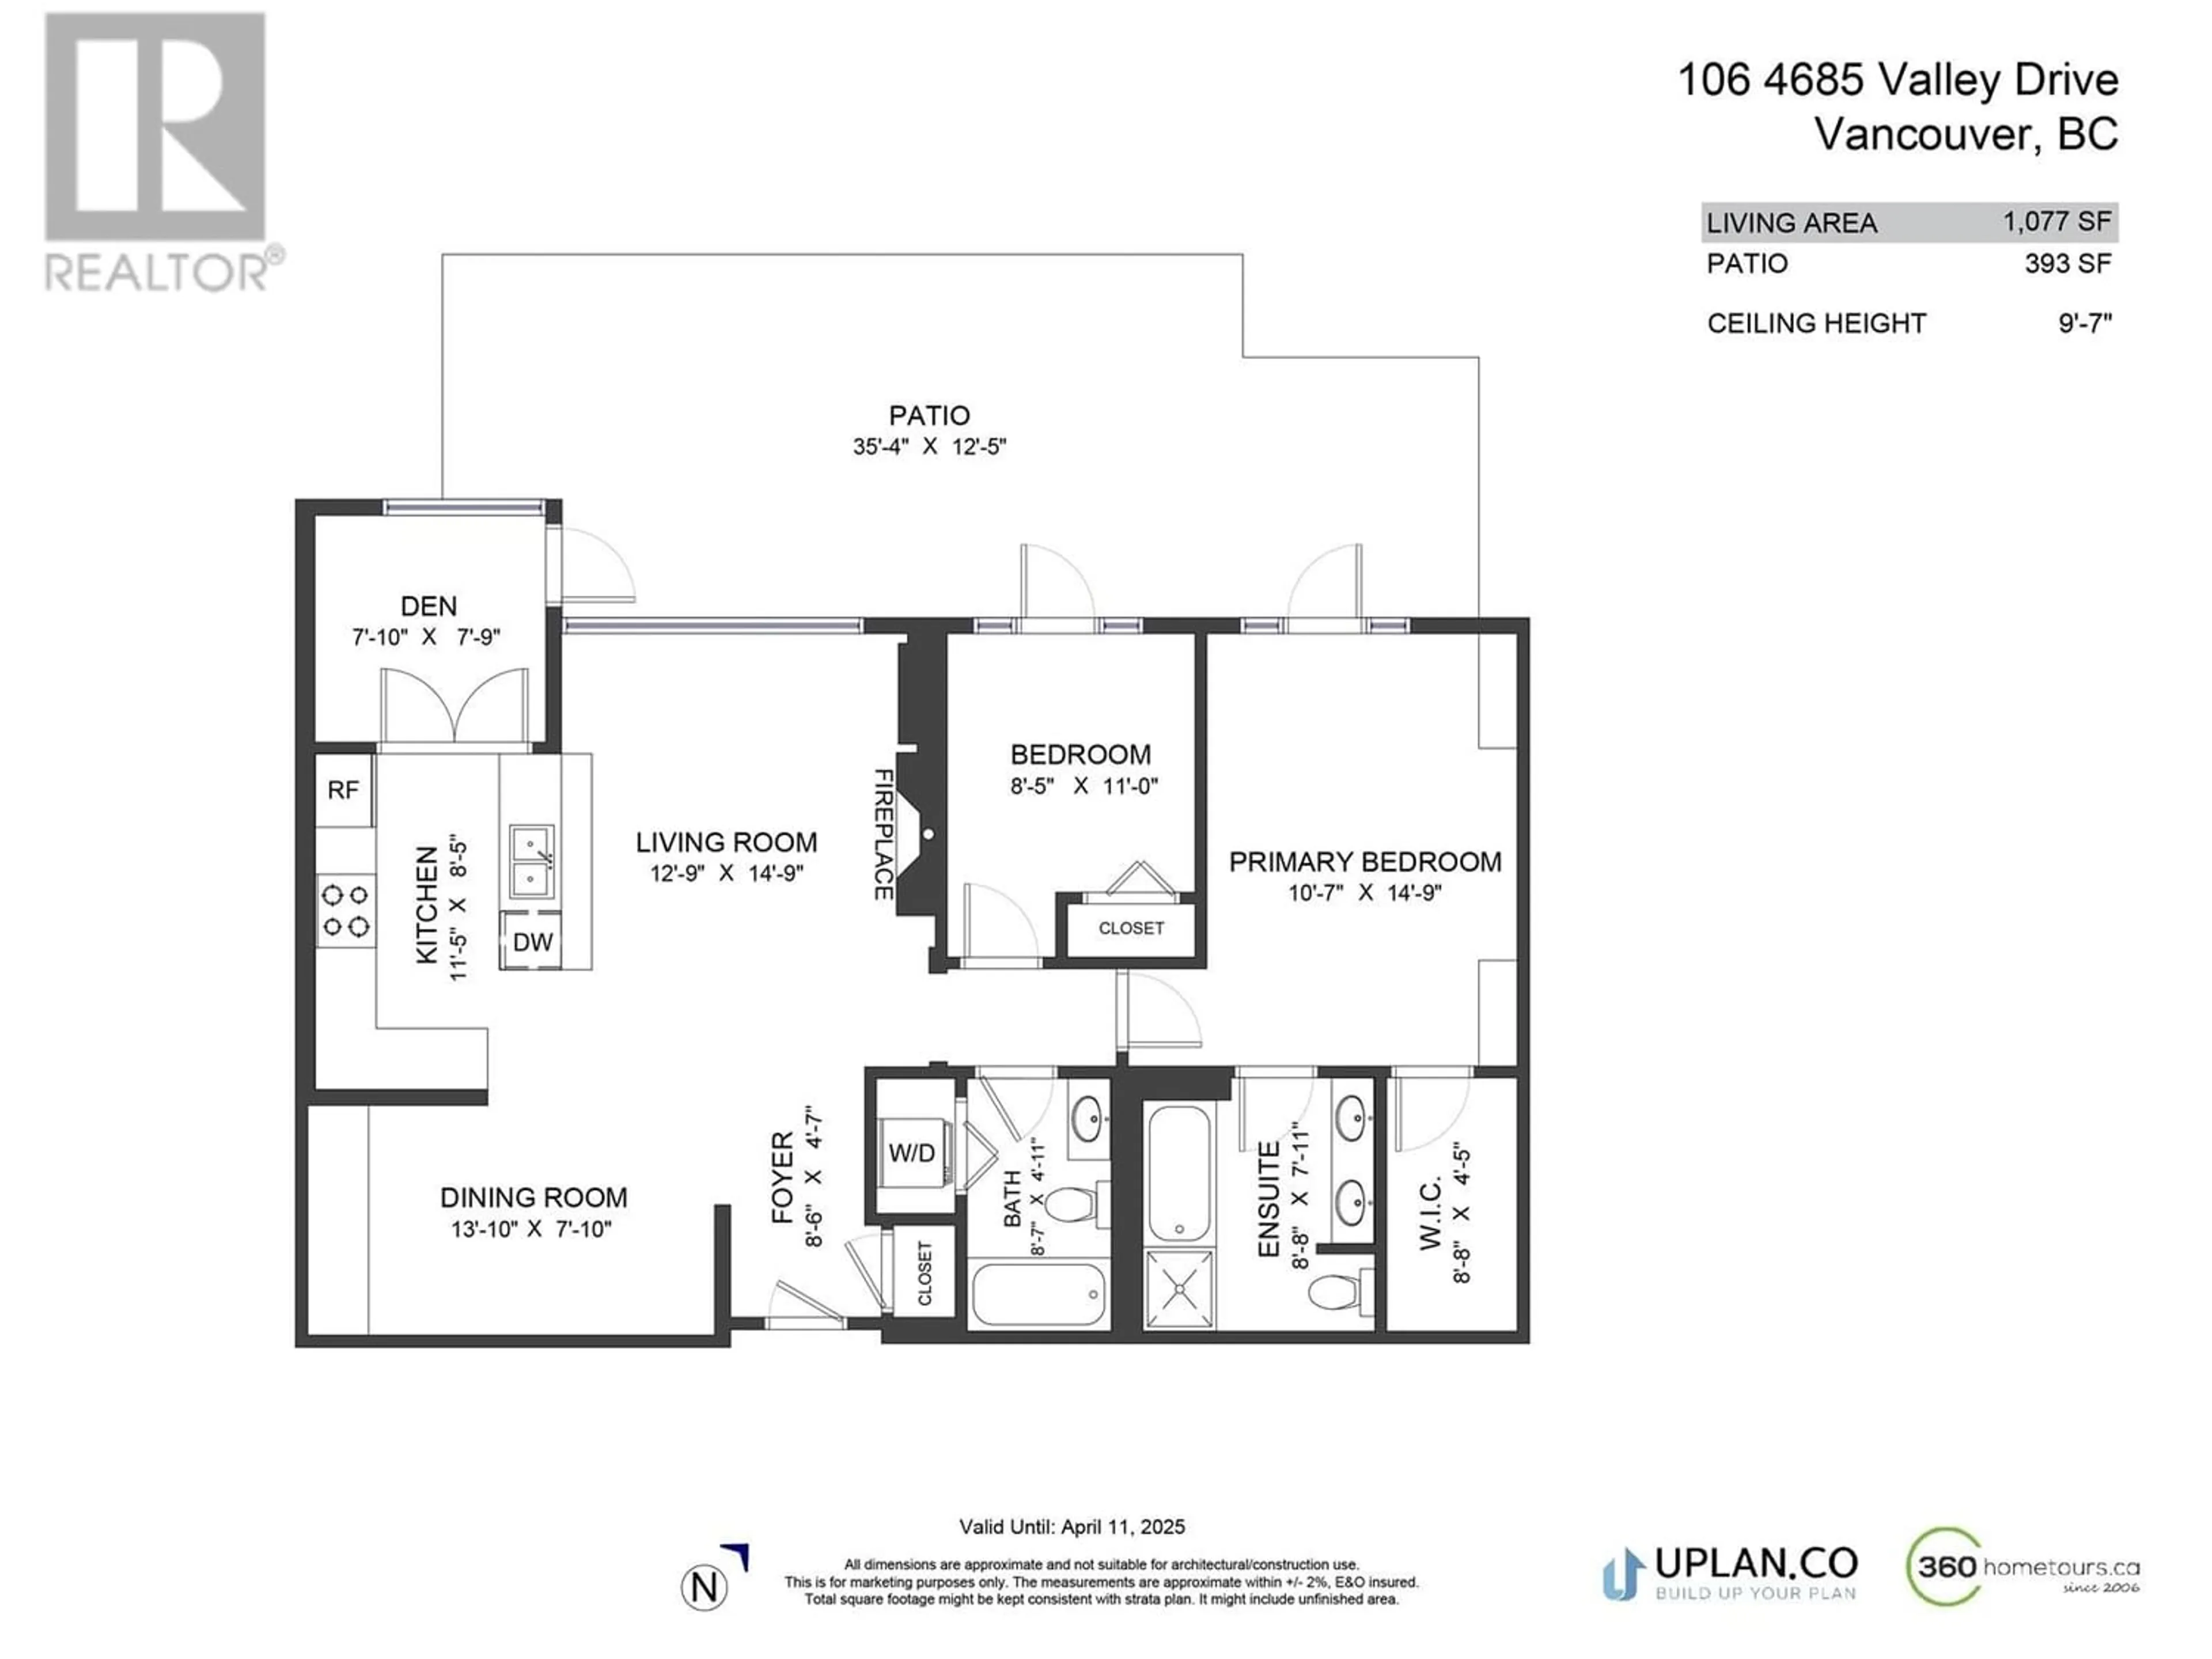 Floor plan for 106 4685 VALLEY DRIVE, Vancouver British Columbia V6J5M2